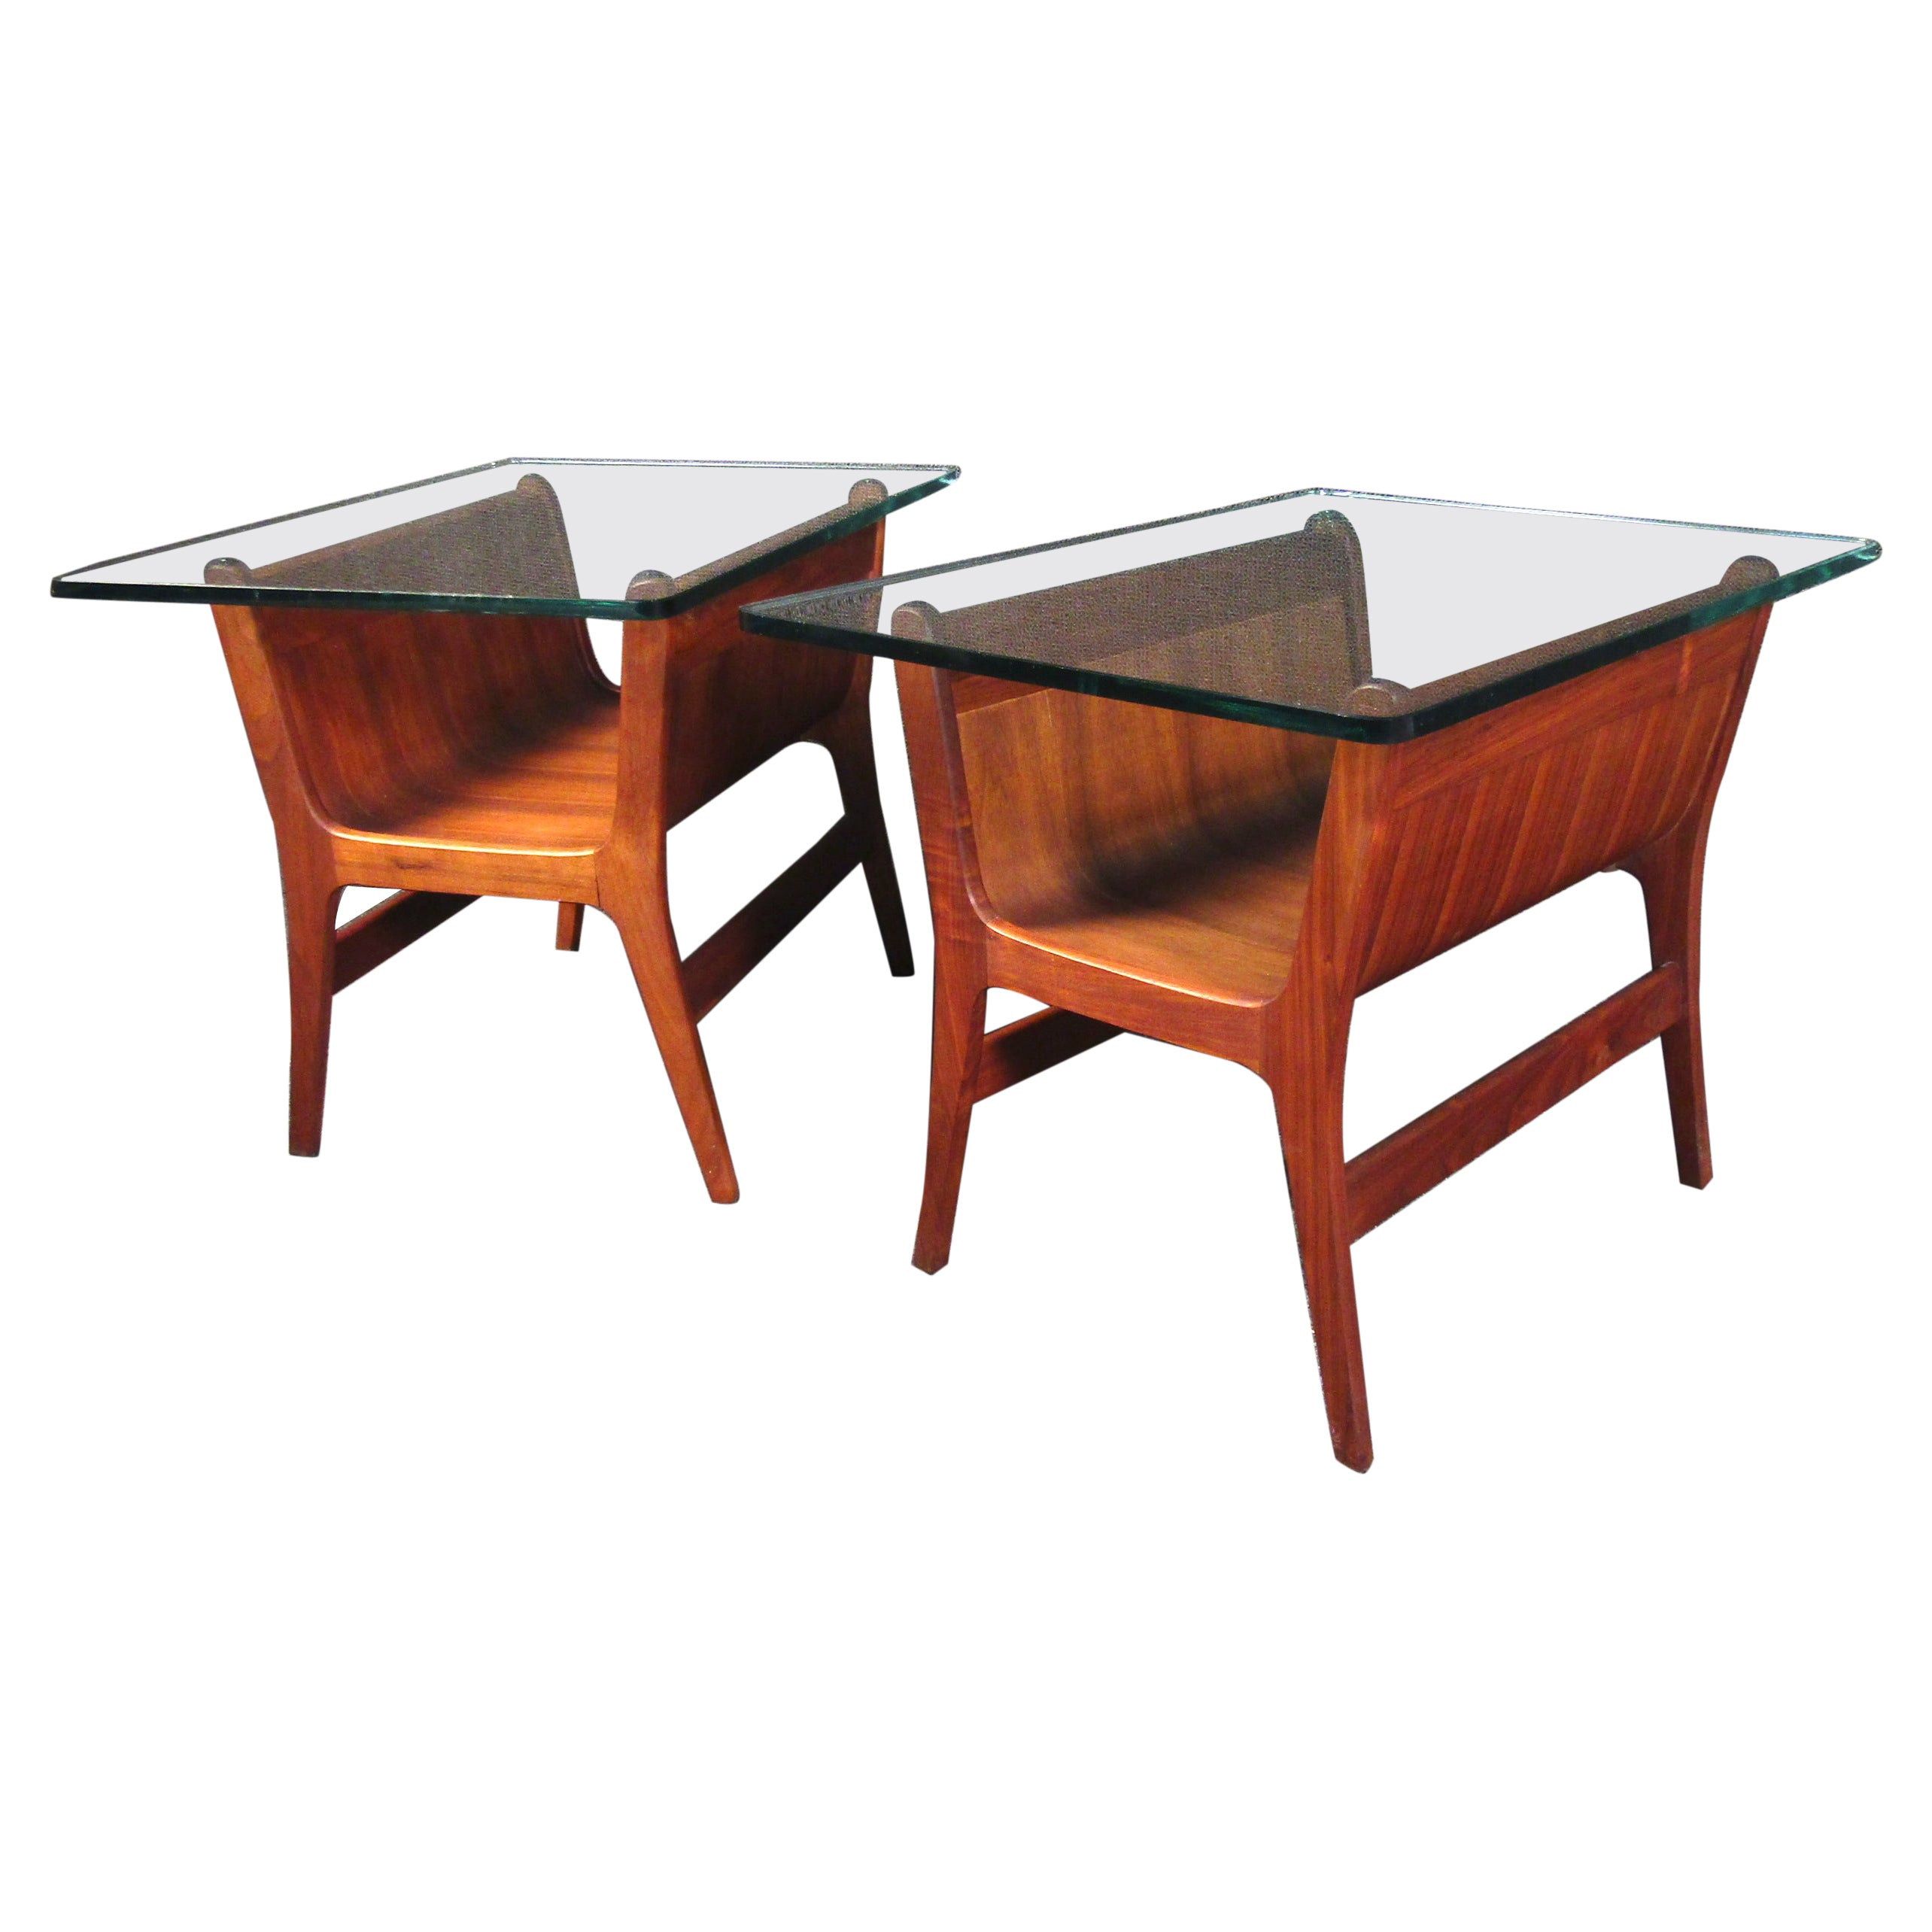 Beautiful Mid-Century Modern Sculptural Wood Side Tables with Glass Tops